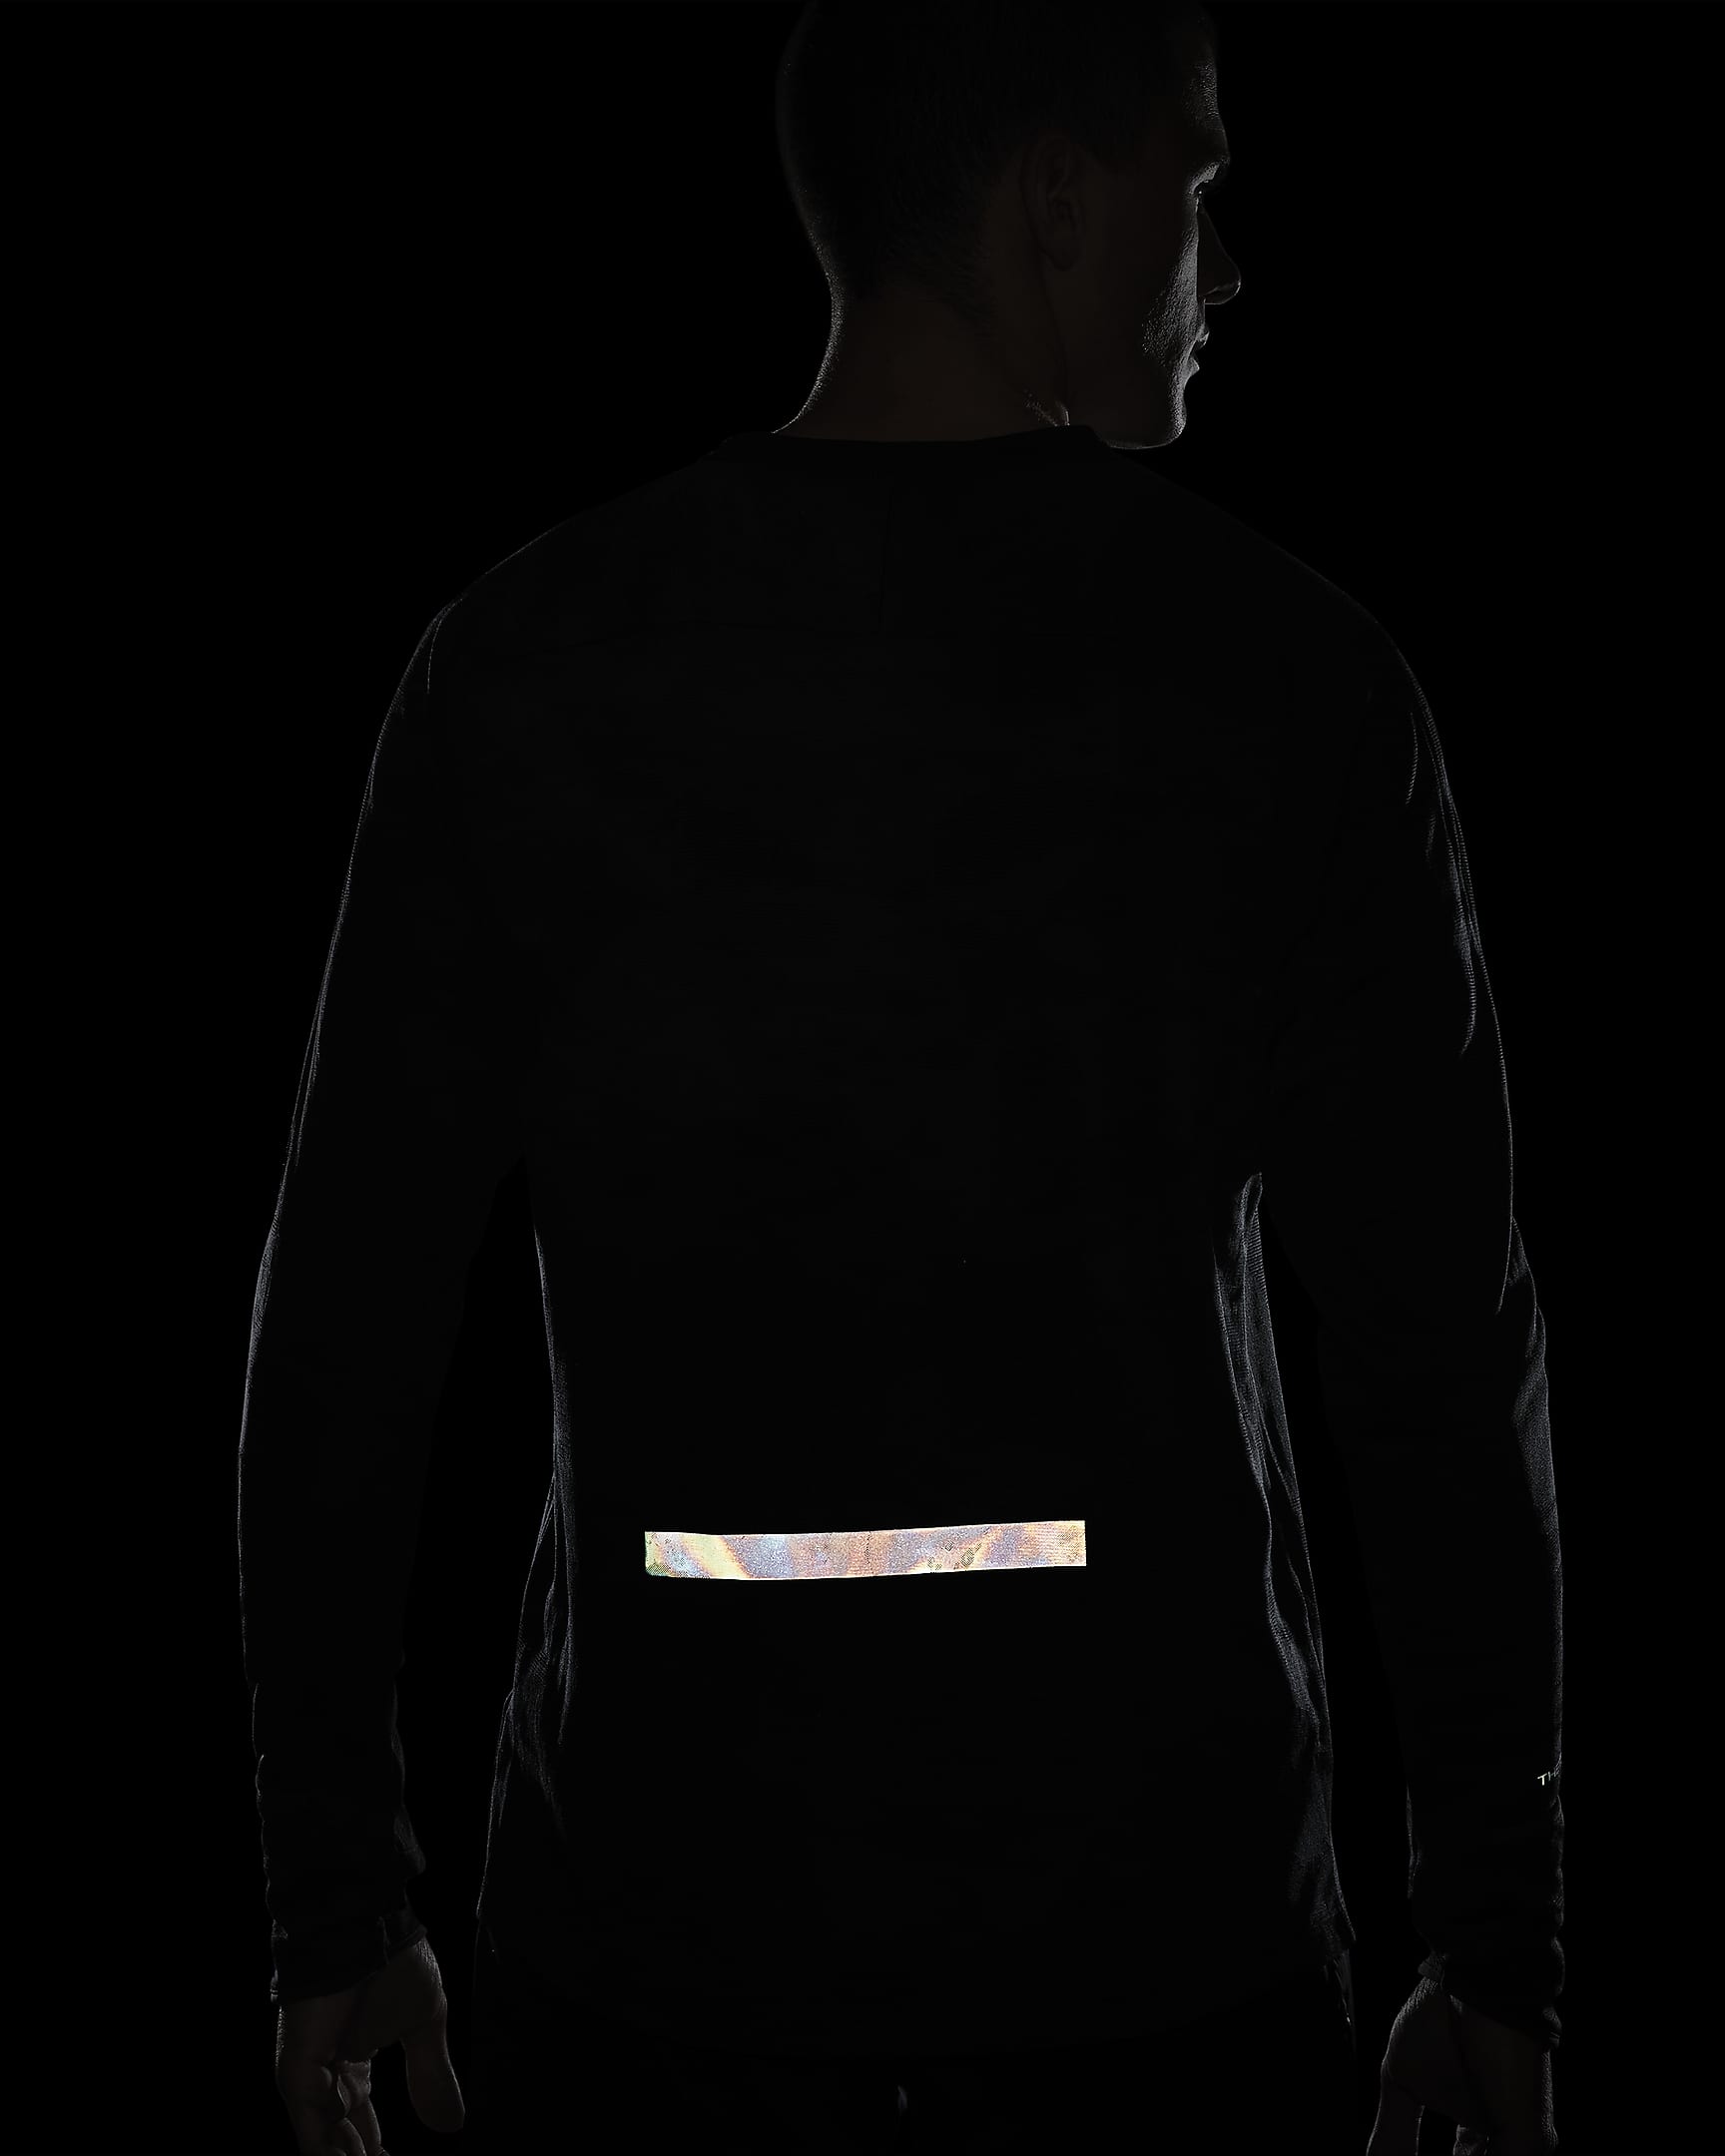 Nike Therma-FIT ADV Running Division Men's Long-Sleeve Running Top. Nike ZA